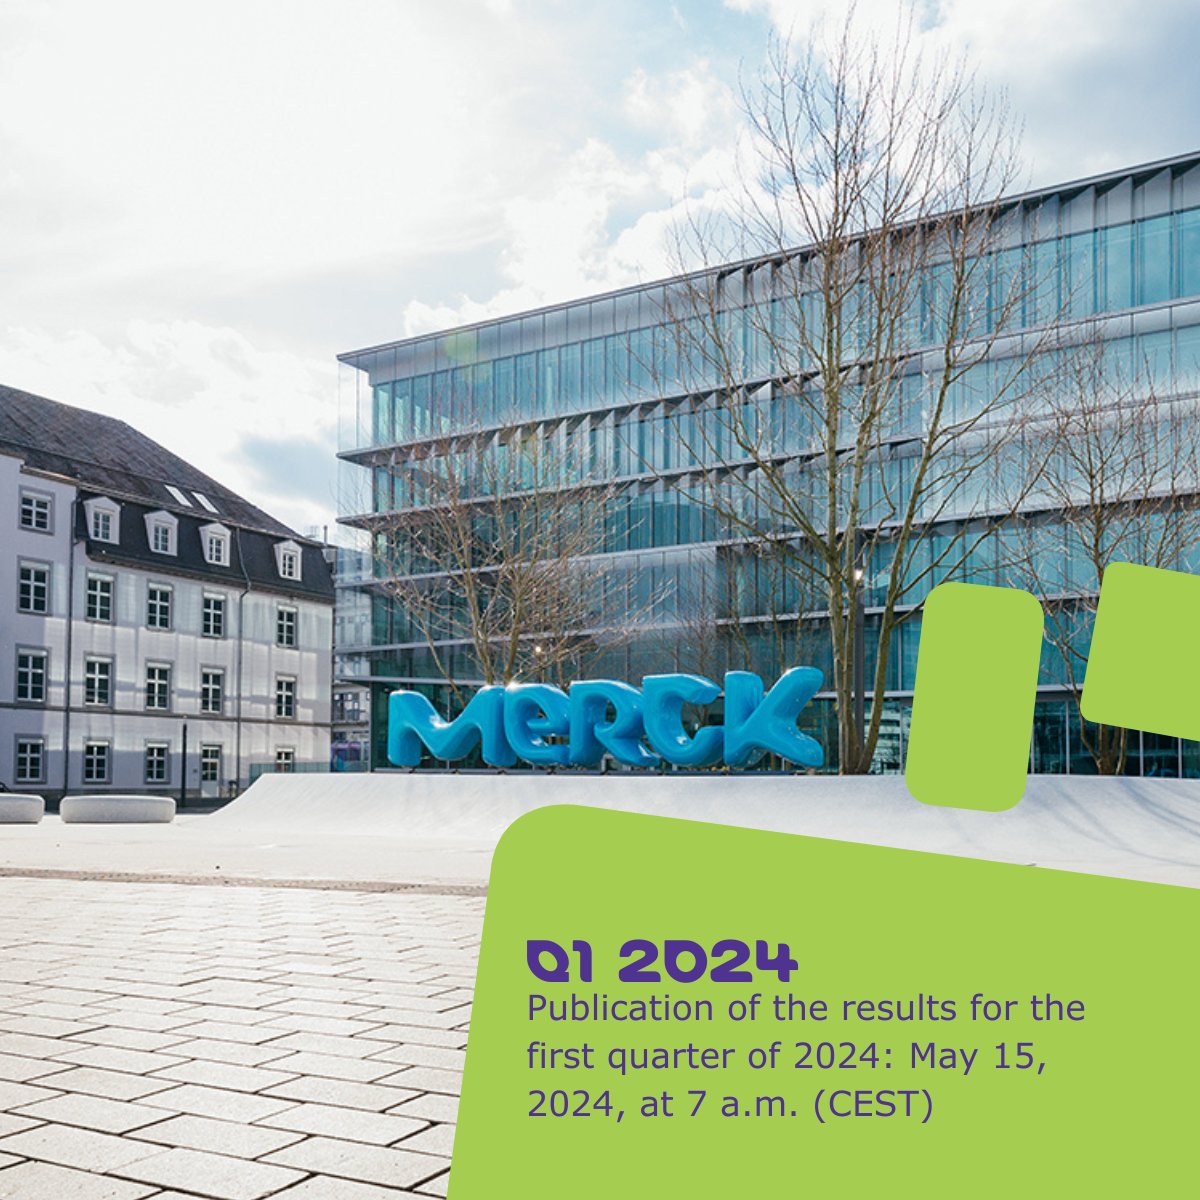 Tomorrow, we will announce our financial results for the first quarter of 2024 at 7 a.m. (CEST). Our conference call for the media will take place at 9:30 a.m. (CEST), and the conference call for analysts at 2 p.m. (CEST). Read more: merckgroup.com/en/media-cente… #MerckResults